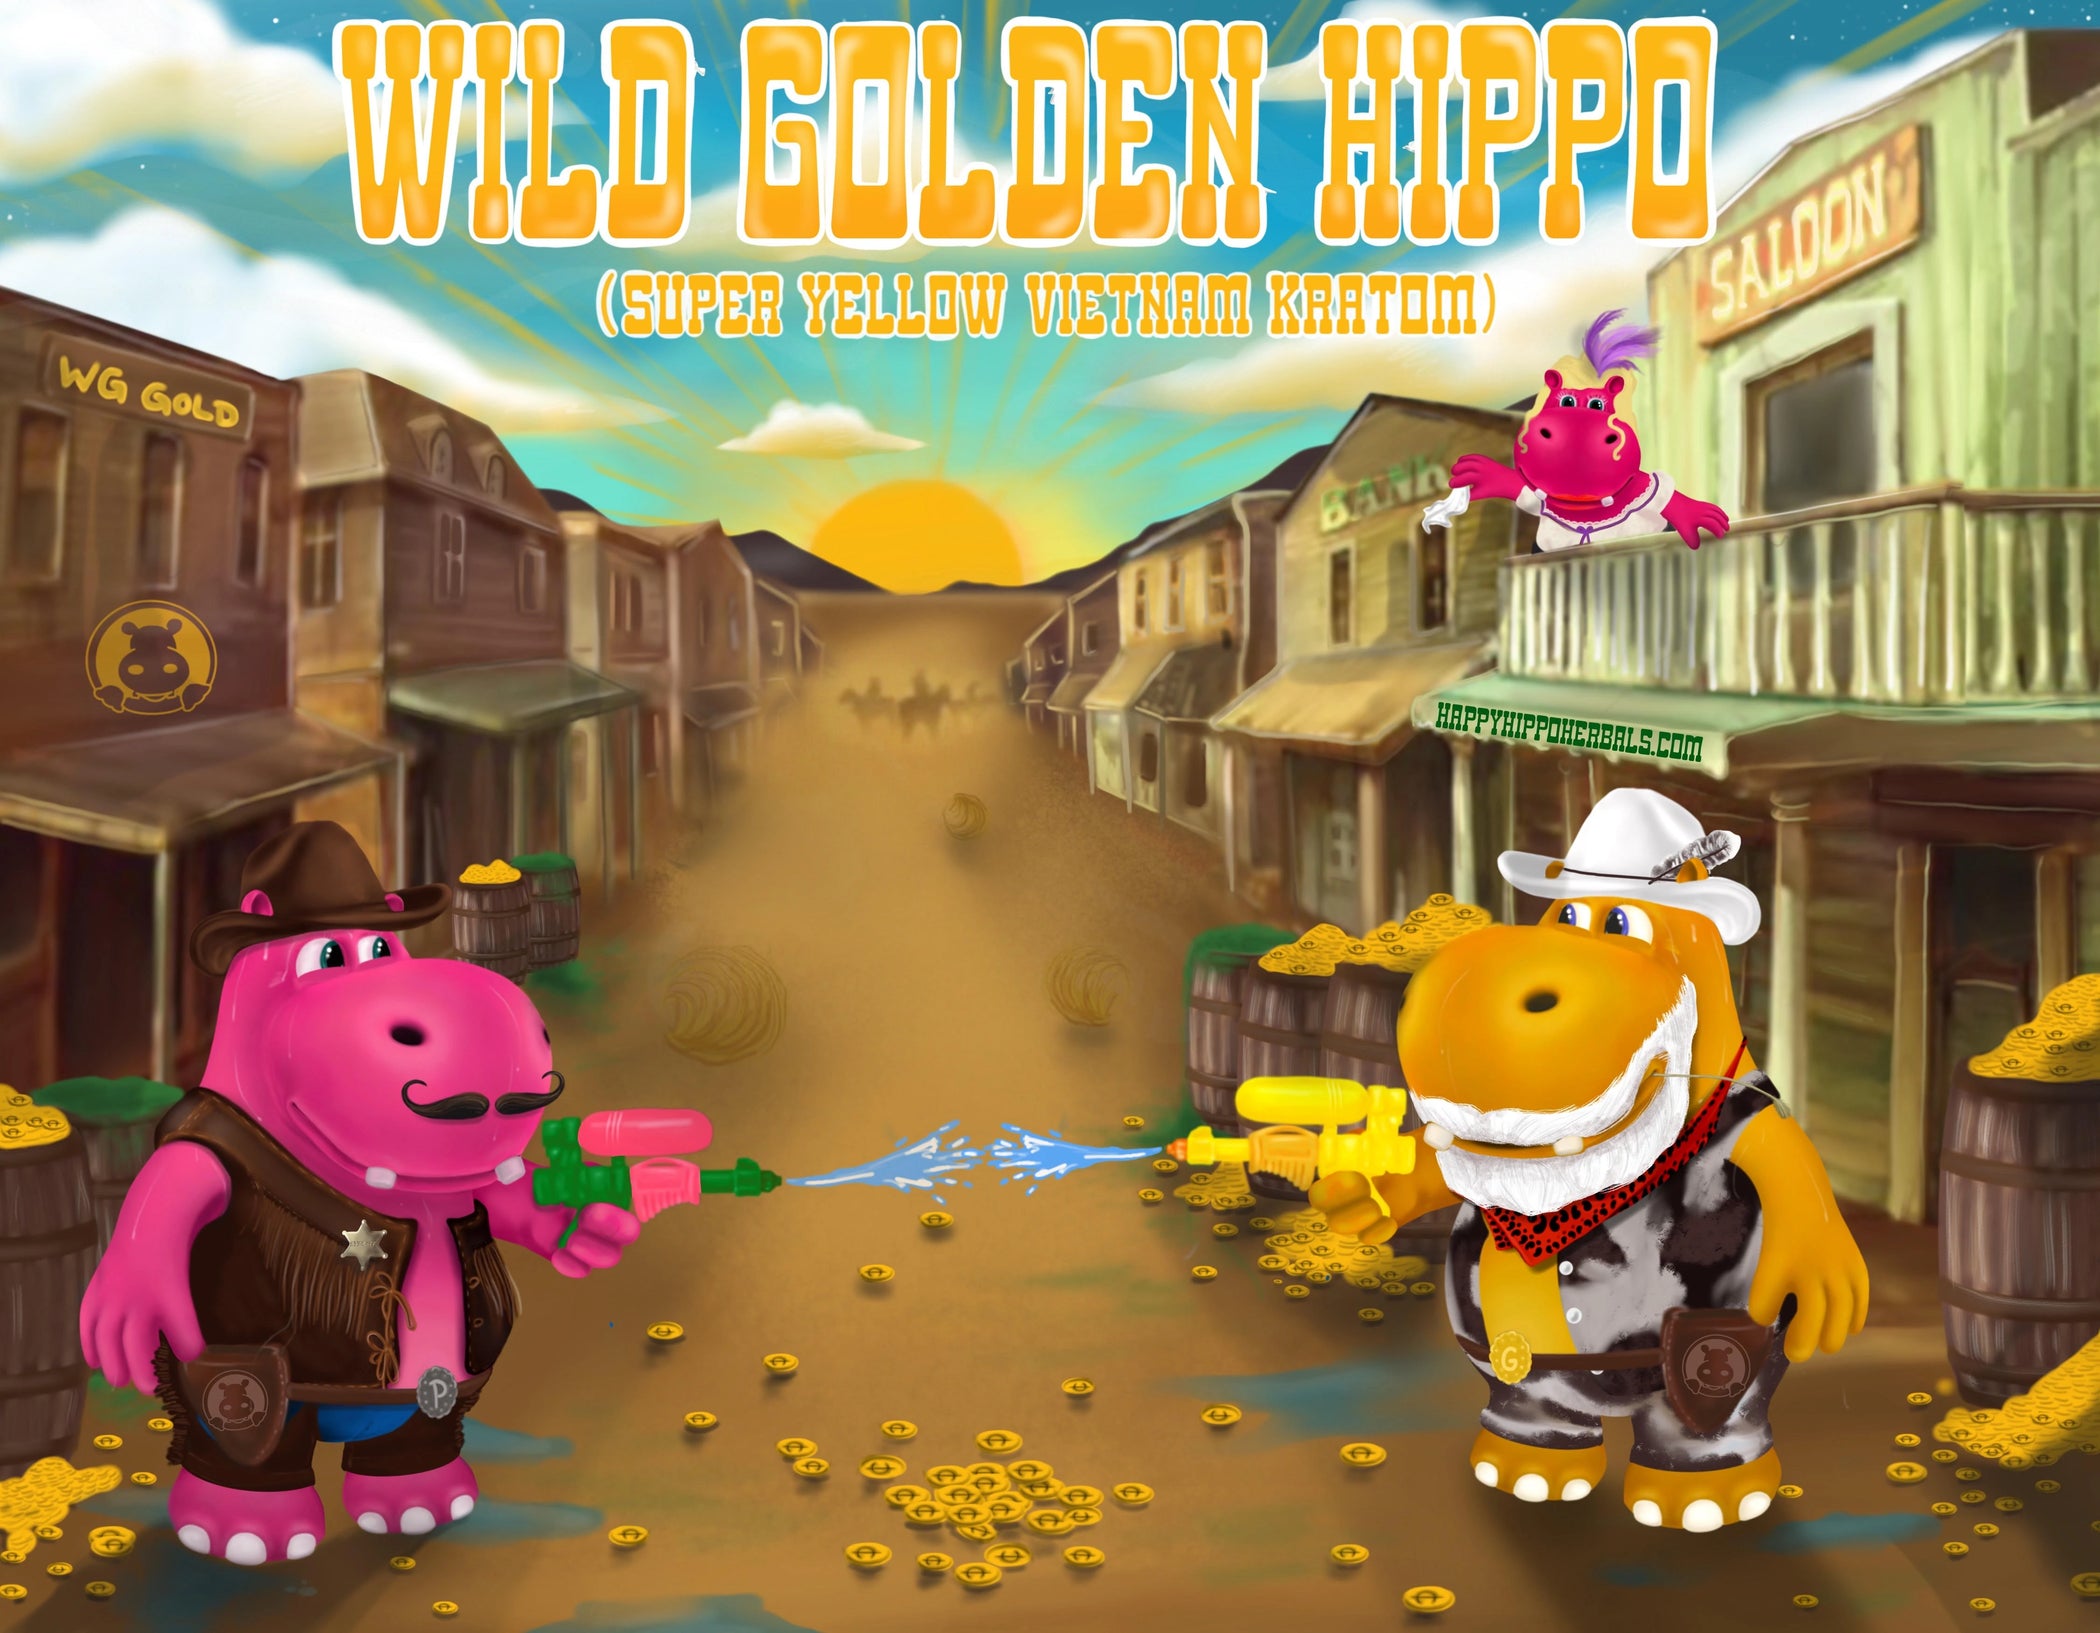 Graphic Designed image depicting Puddles the Hippo in a squirt-gun showdown on the main street of an old-west town, while feeling the joyful spirit effects of Yellow Vietnam Kratom Powder (Wild Golden Hippo) 